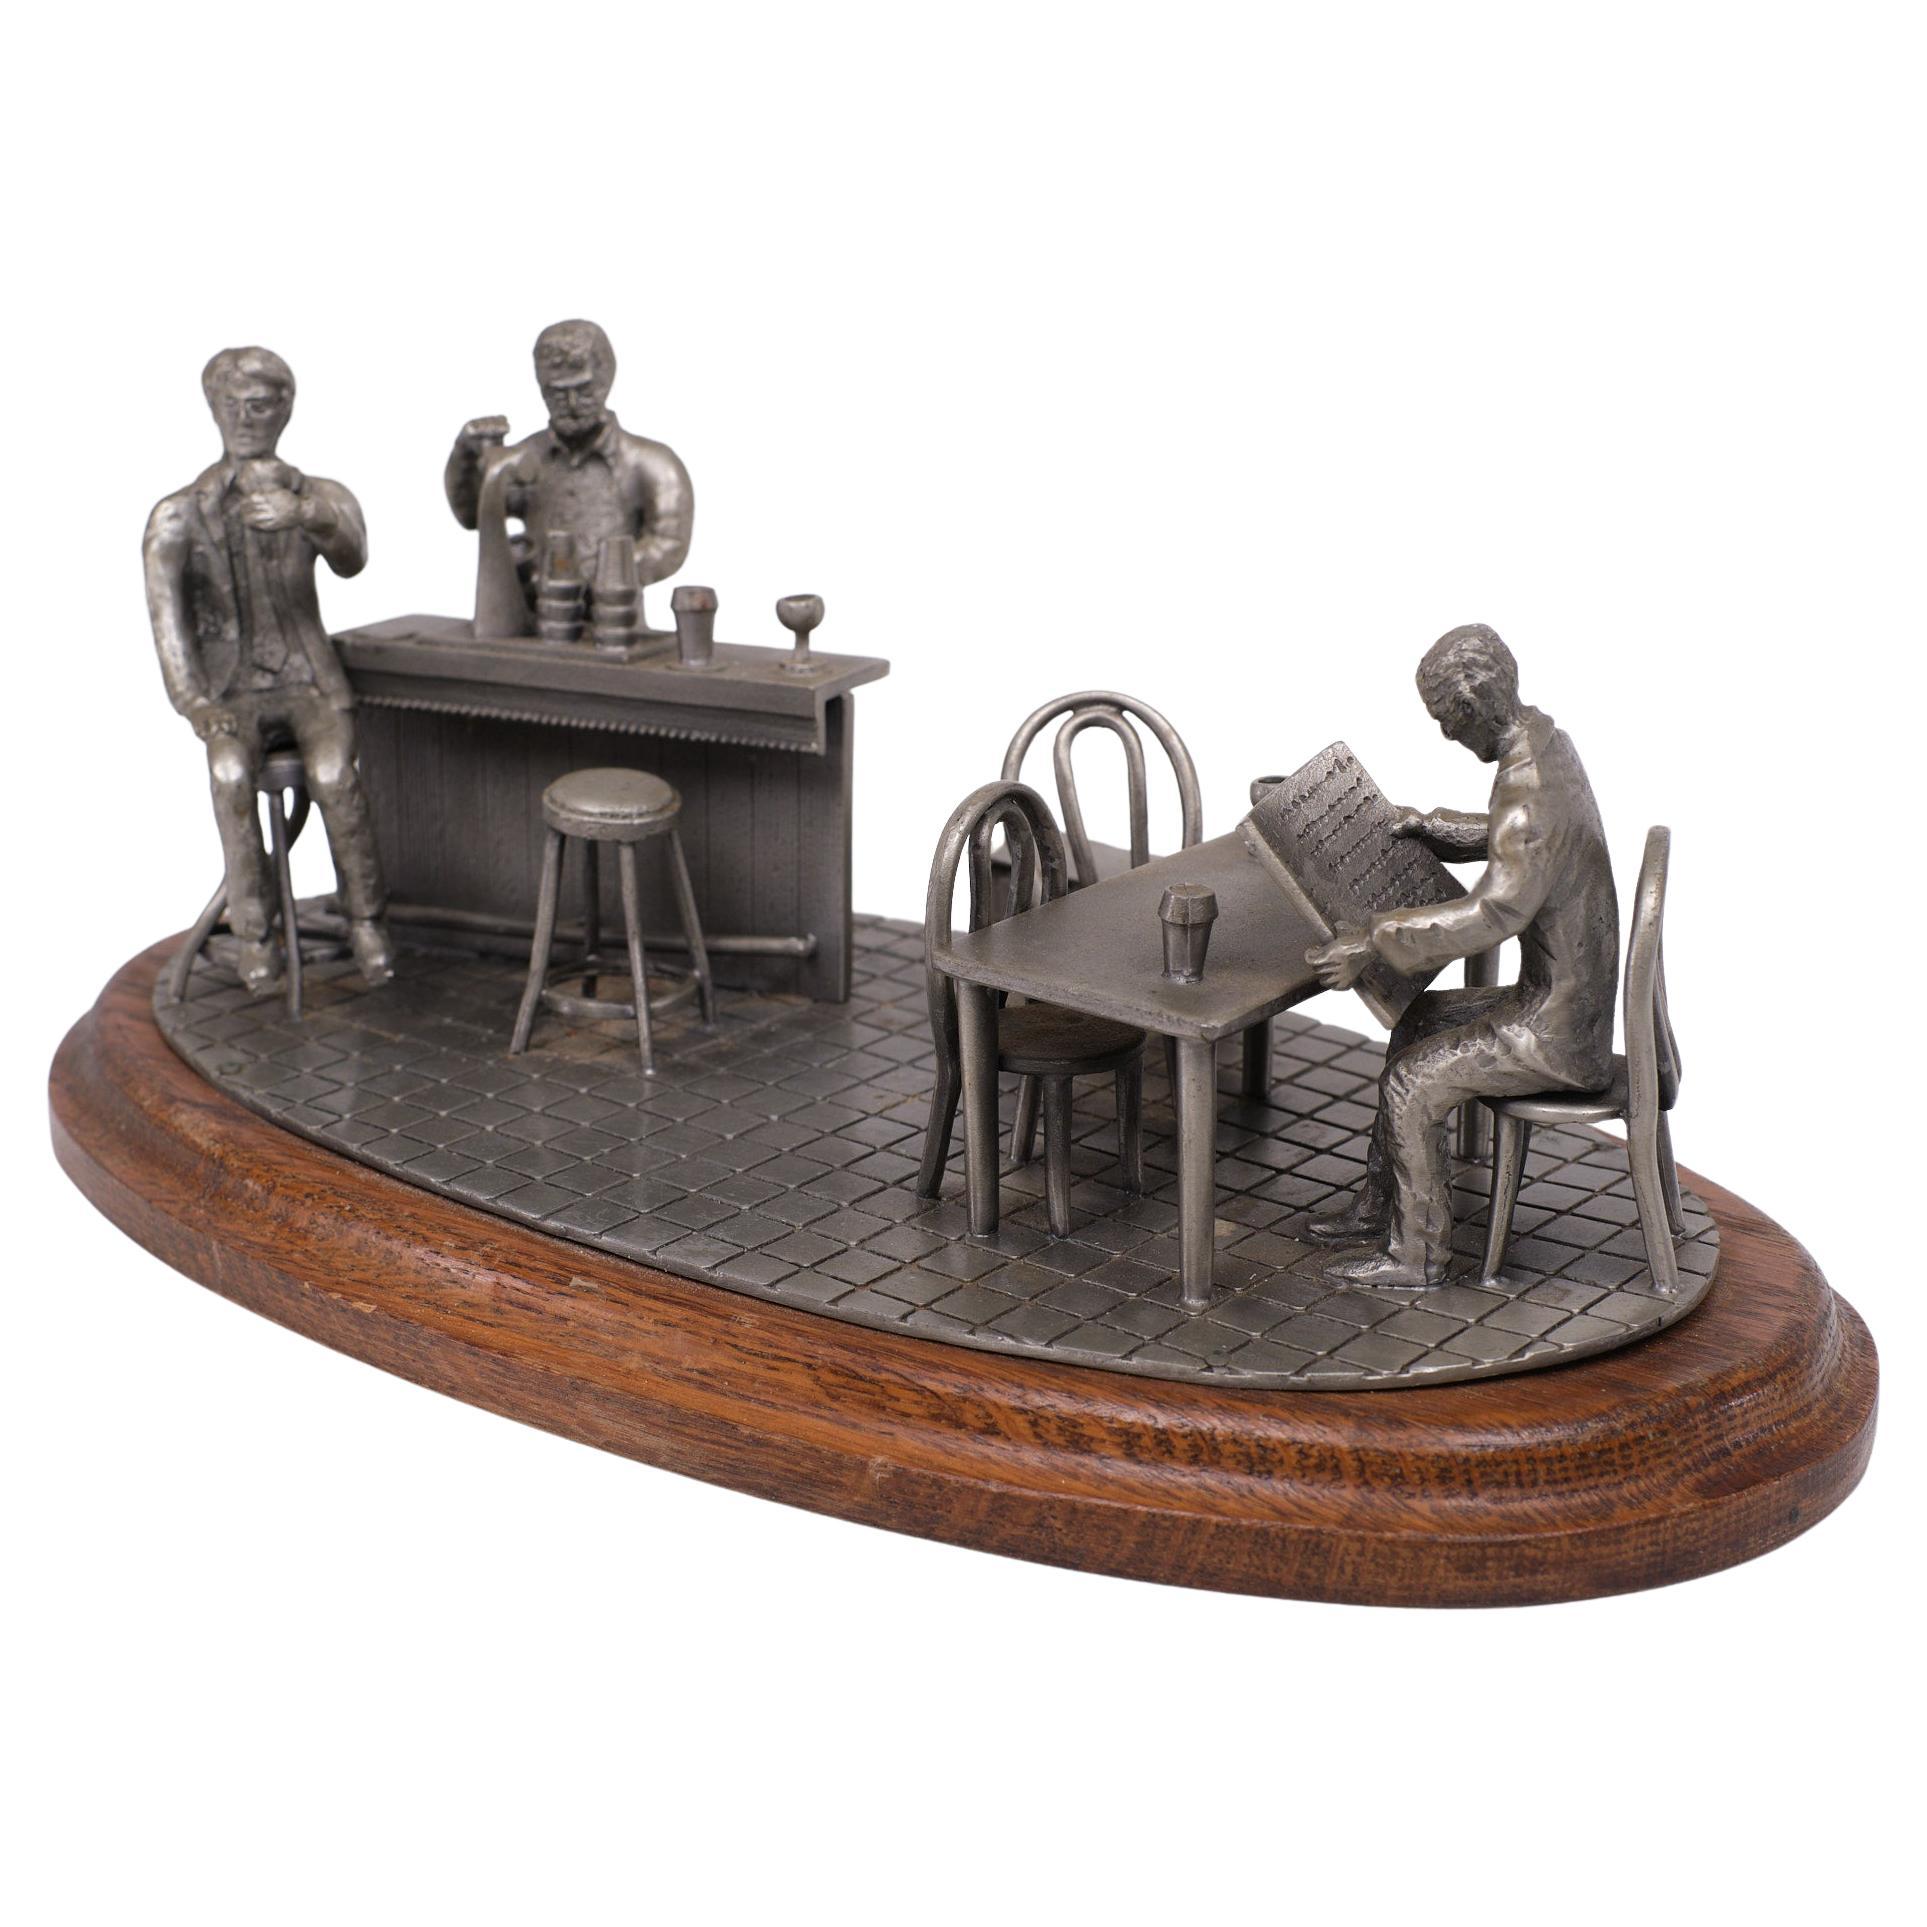 Very rare large Pewter bar scene. Signed Tin Etain Zinn Pewter, several figures and furniture in a bar. Standing on a oak base. 1970s Dutch.
 